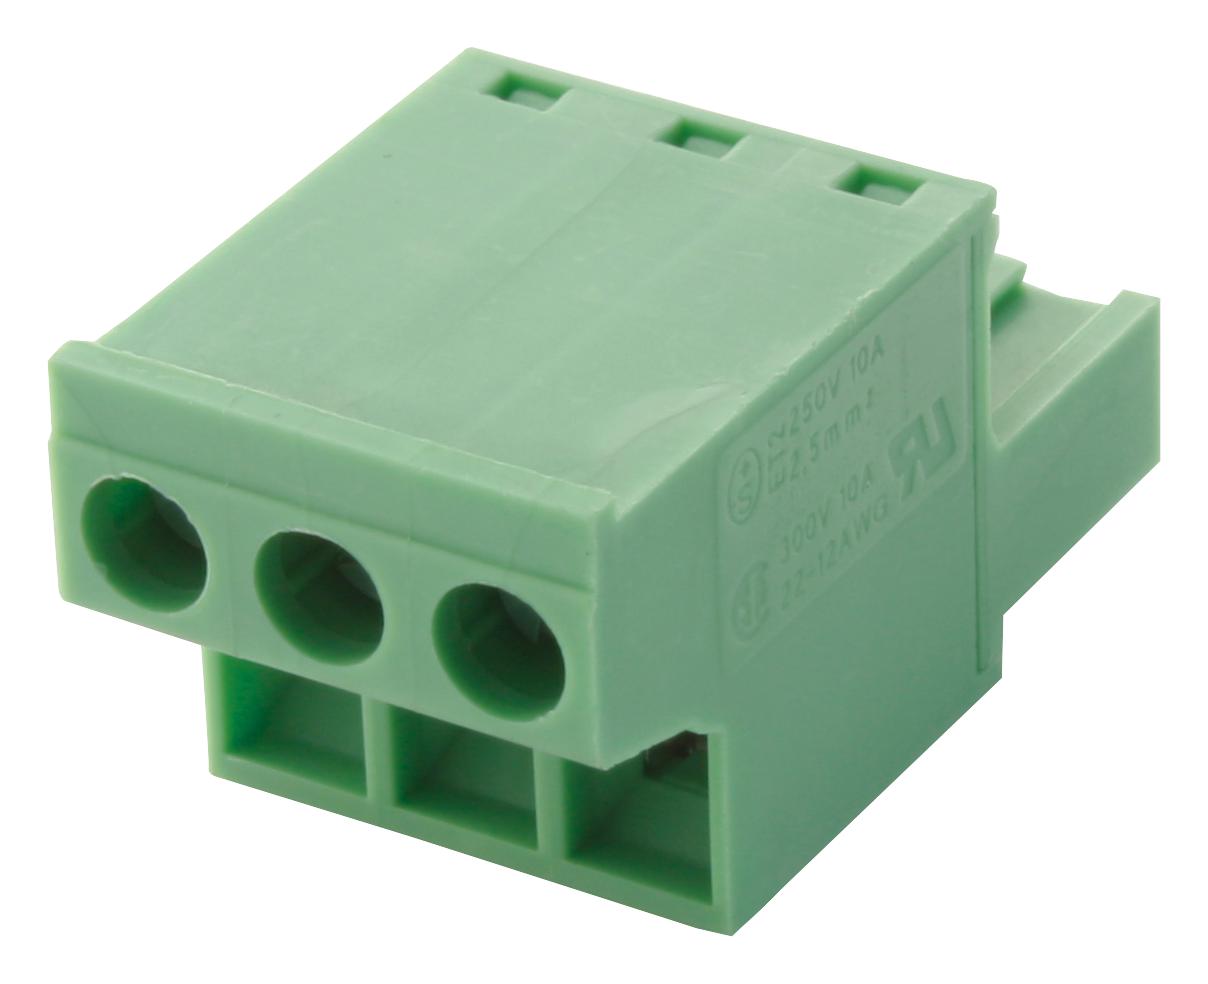 FRONT-MSTB2,5/3-ST-5,08 TERMINAL BLOCK, PLUGGABLE, 3POS, 12AWG PHOENIX CONTACT